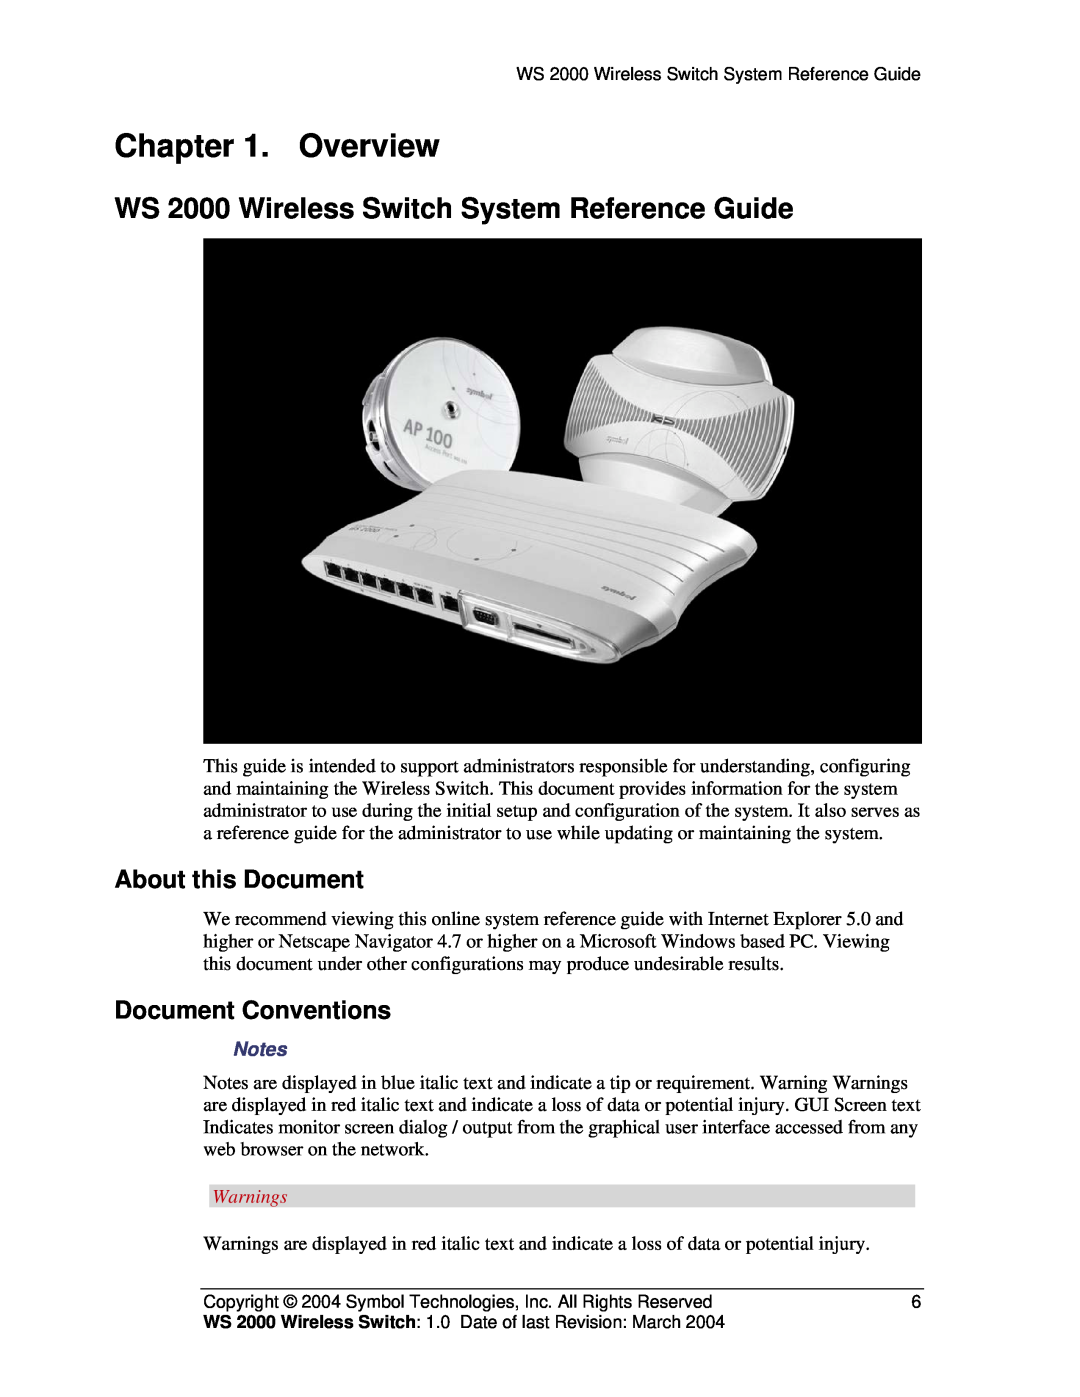 Symbol Technologies Overview, WS 2000 Wireless Switch System Reference Guide, About this Document, Document Conventions 